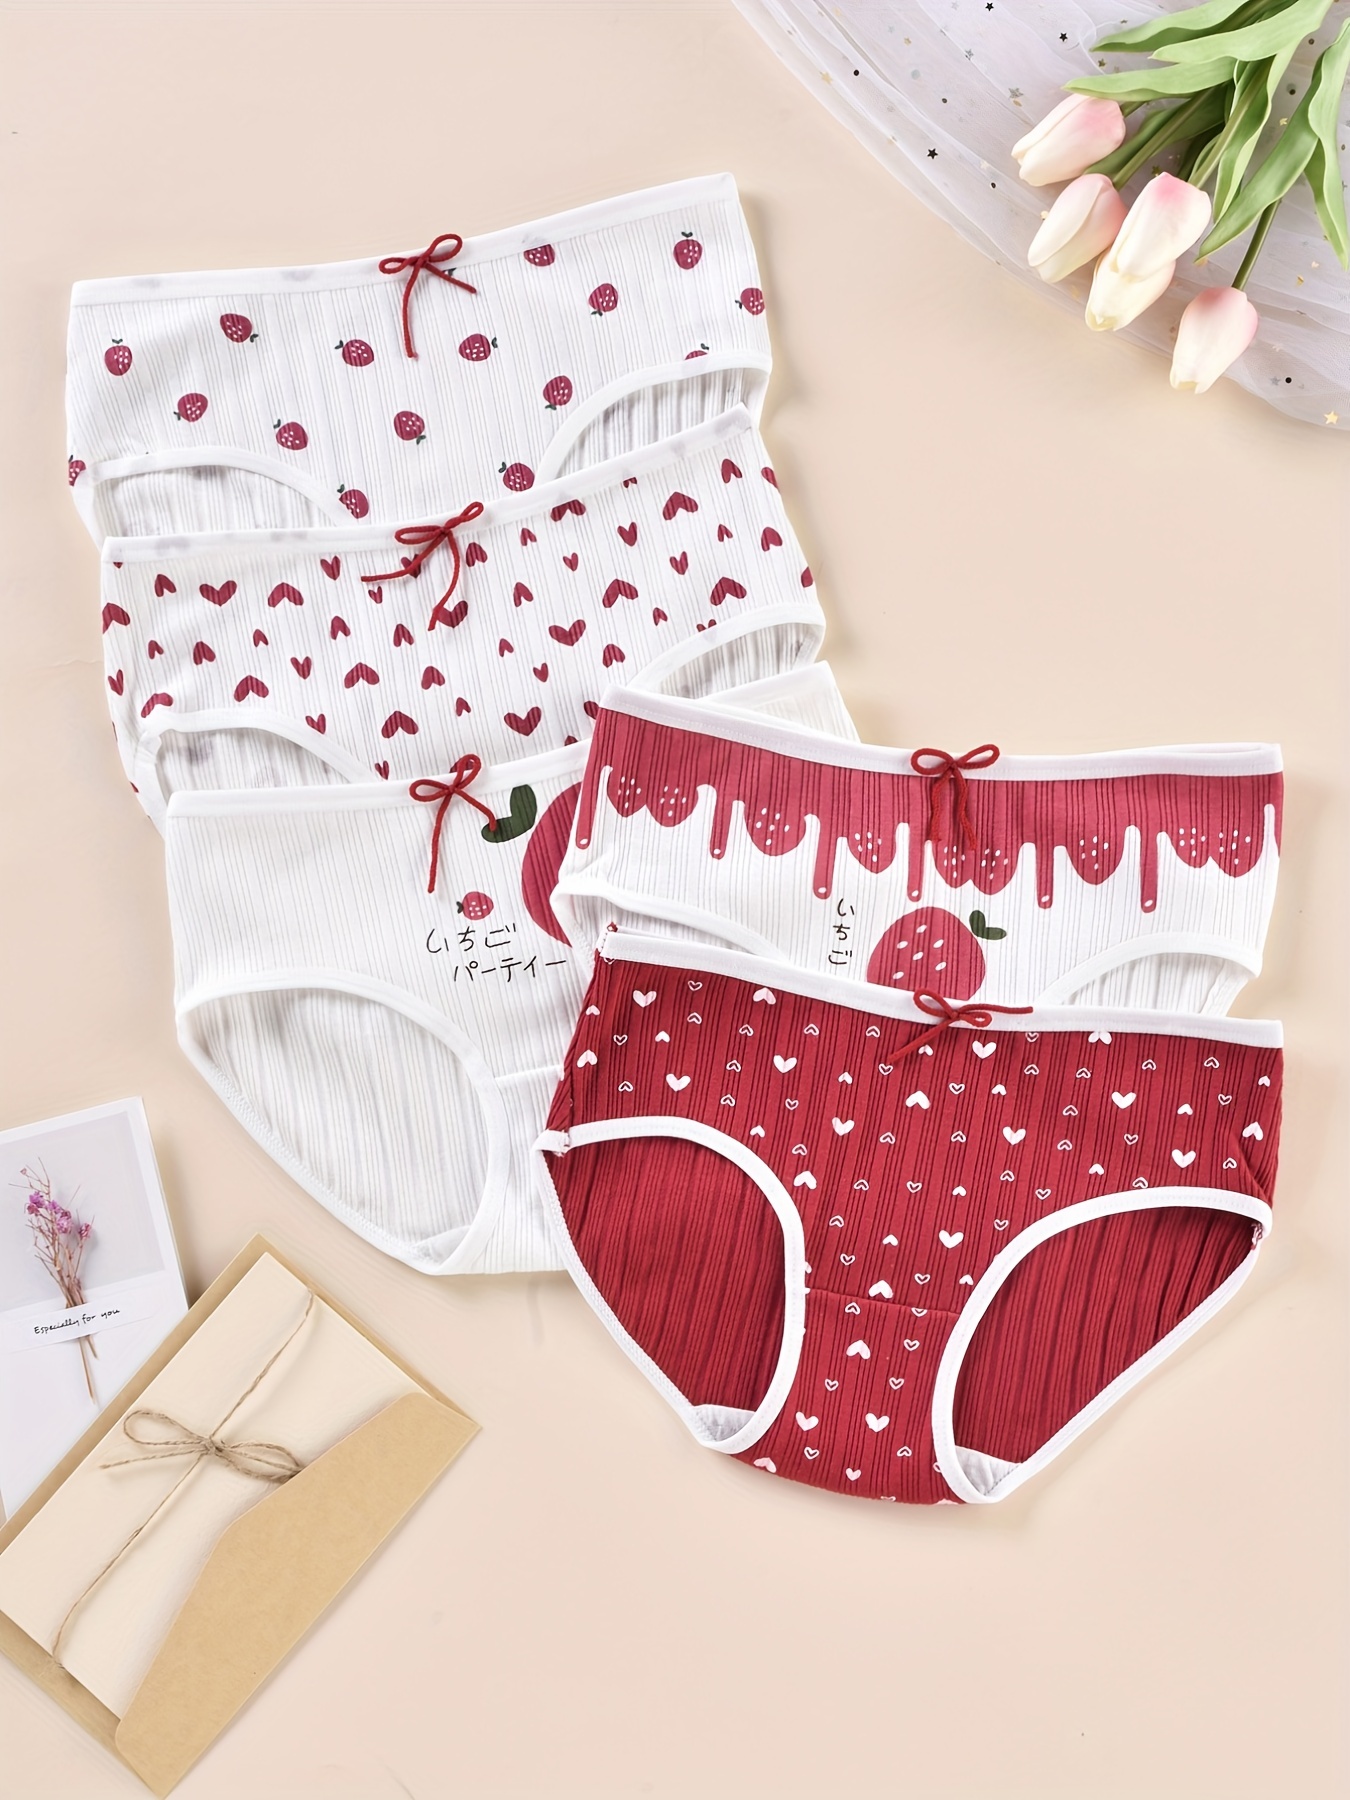 Women Bear Printed Panties Strawberry Bow Briefs Intimates Cotton Shorts  Underpants Cute Lace Panty